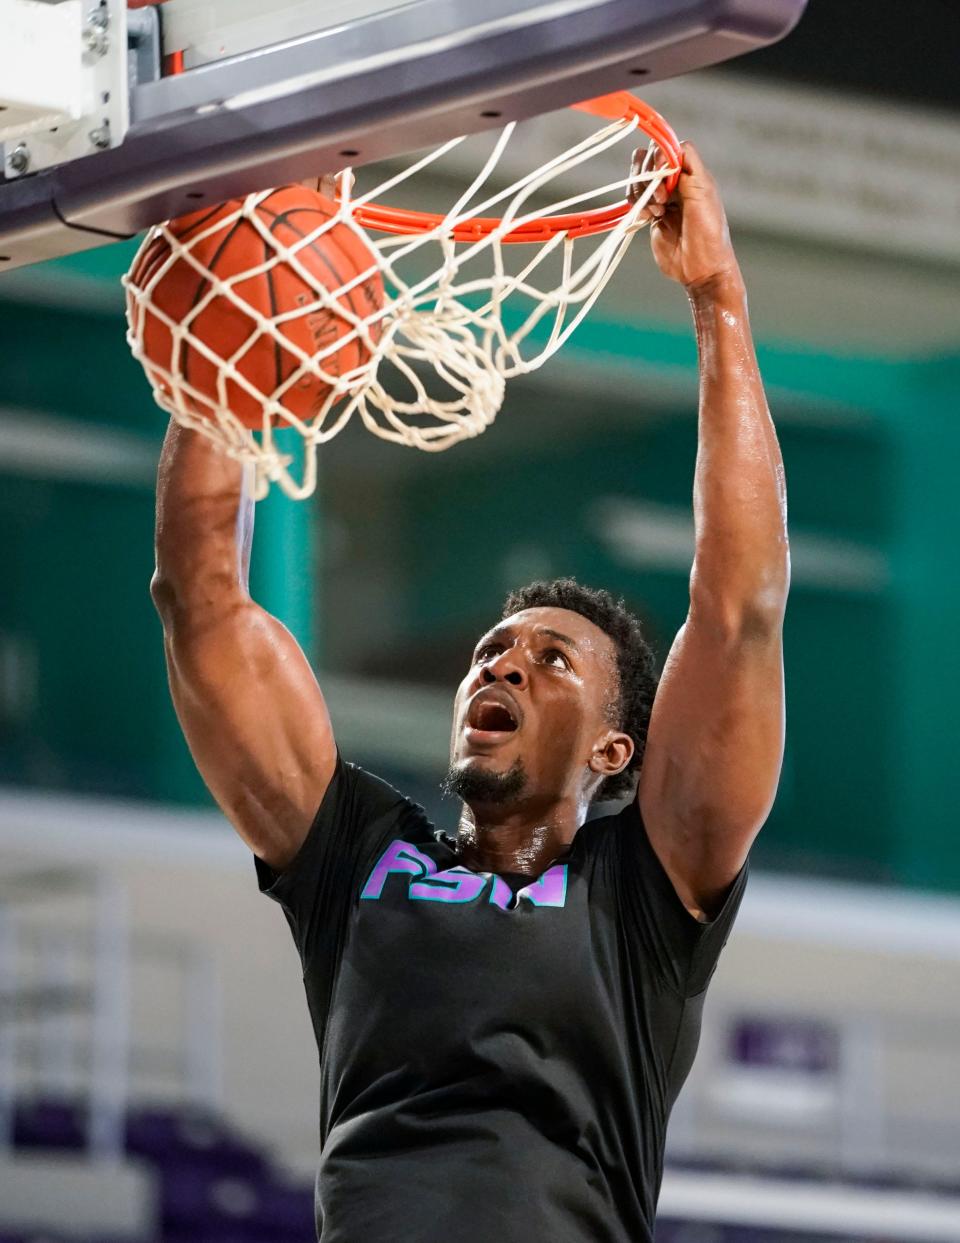 FSW forward Allen Udemadu dunks during practice at Suncoast Credit Union Arena in Fort Myers on Tuesday, February 28, 2023.